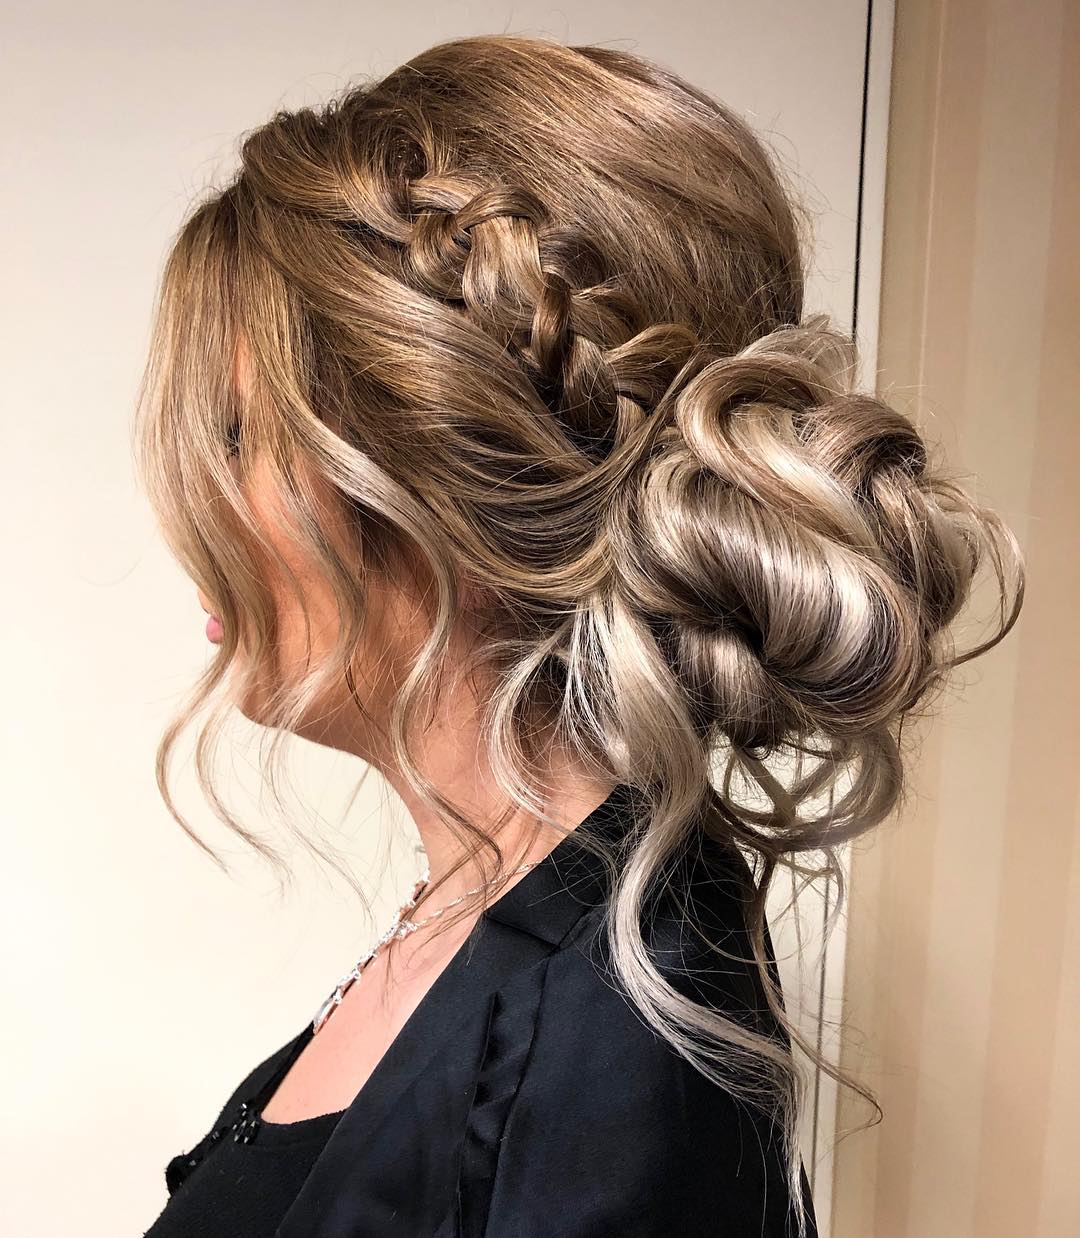 45 Pretty Braided Hairstyles for 2022 Looking Absolutely Stunning